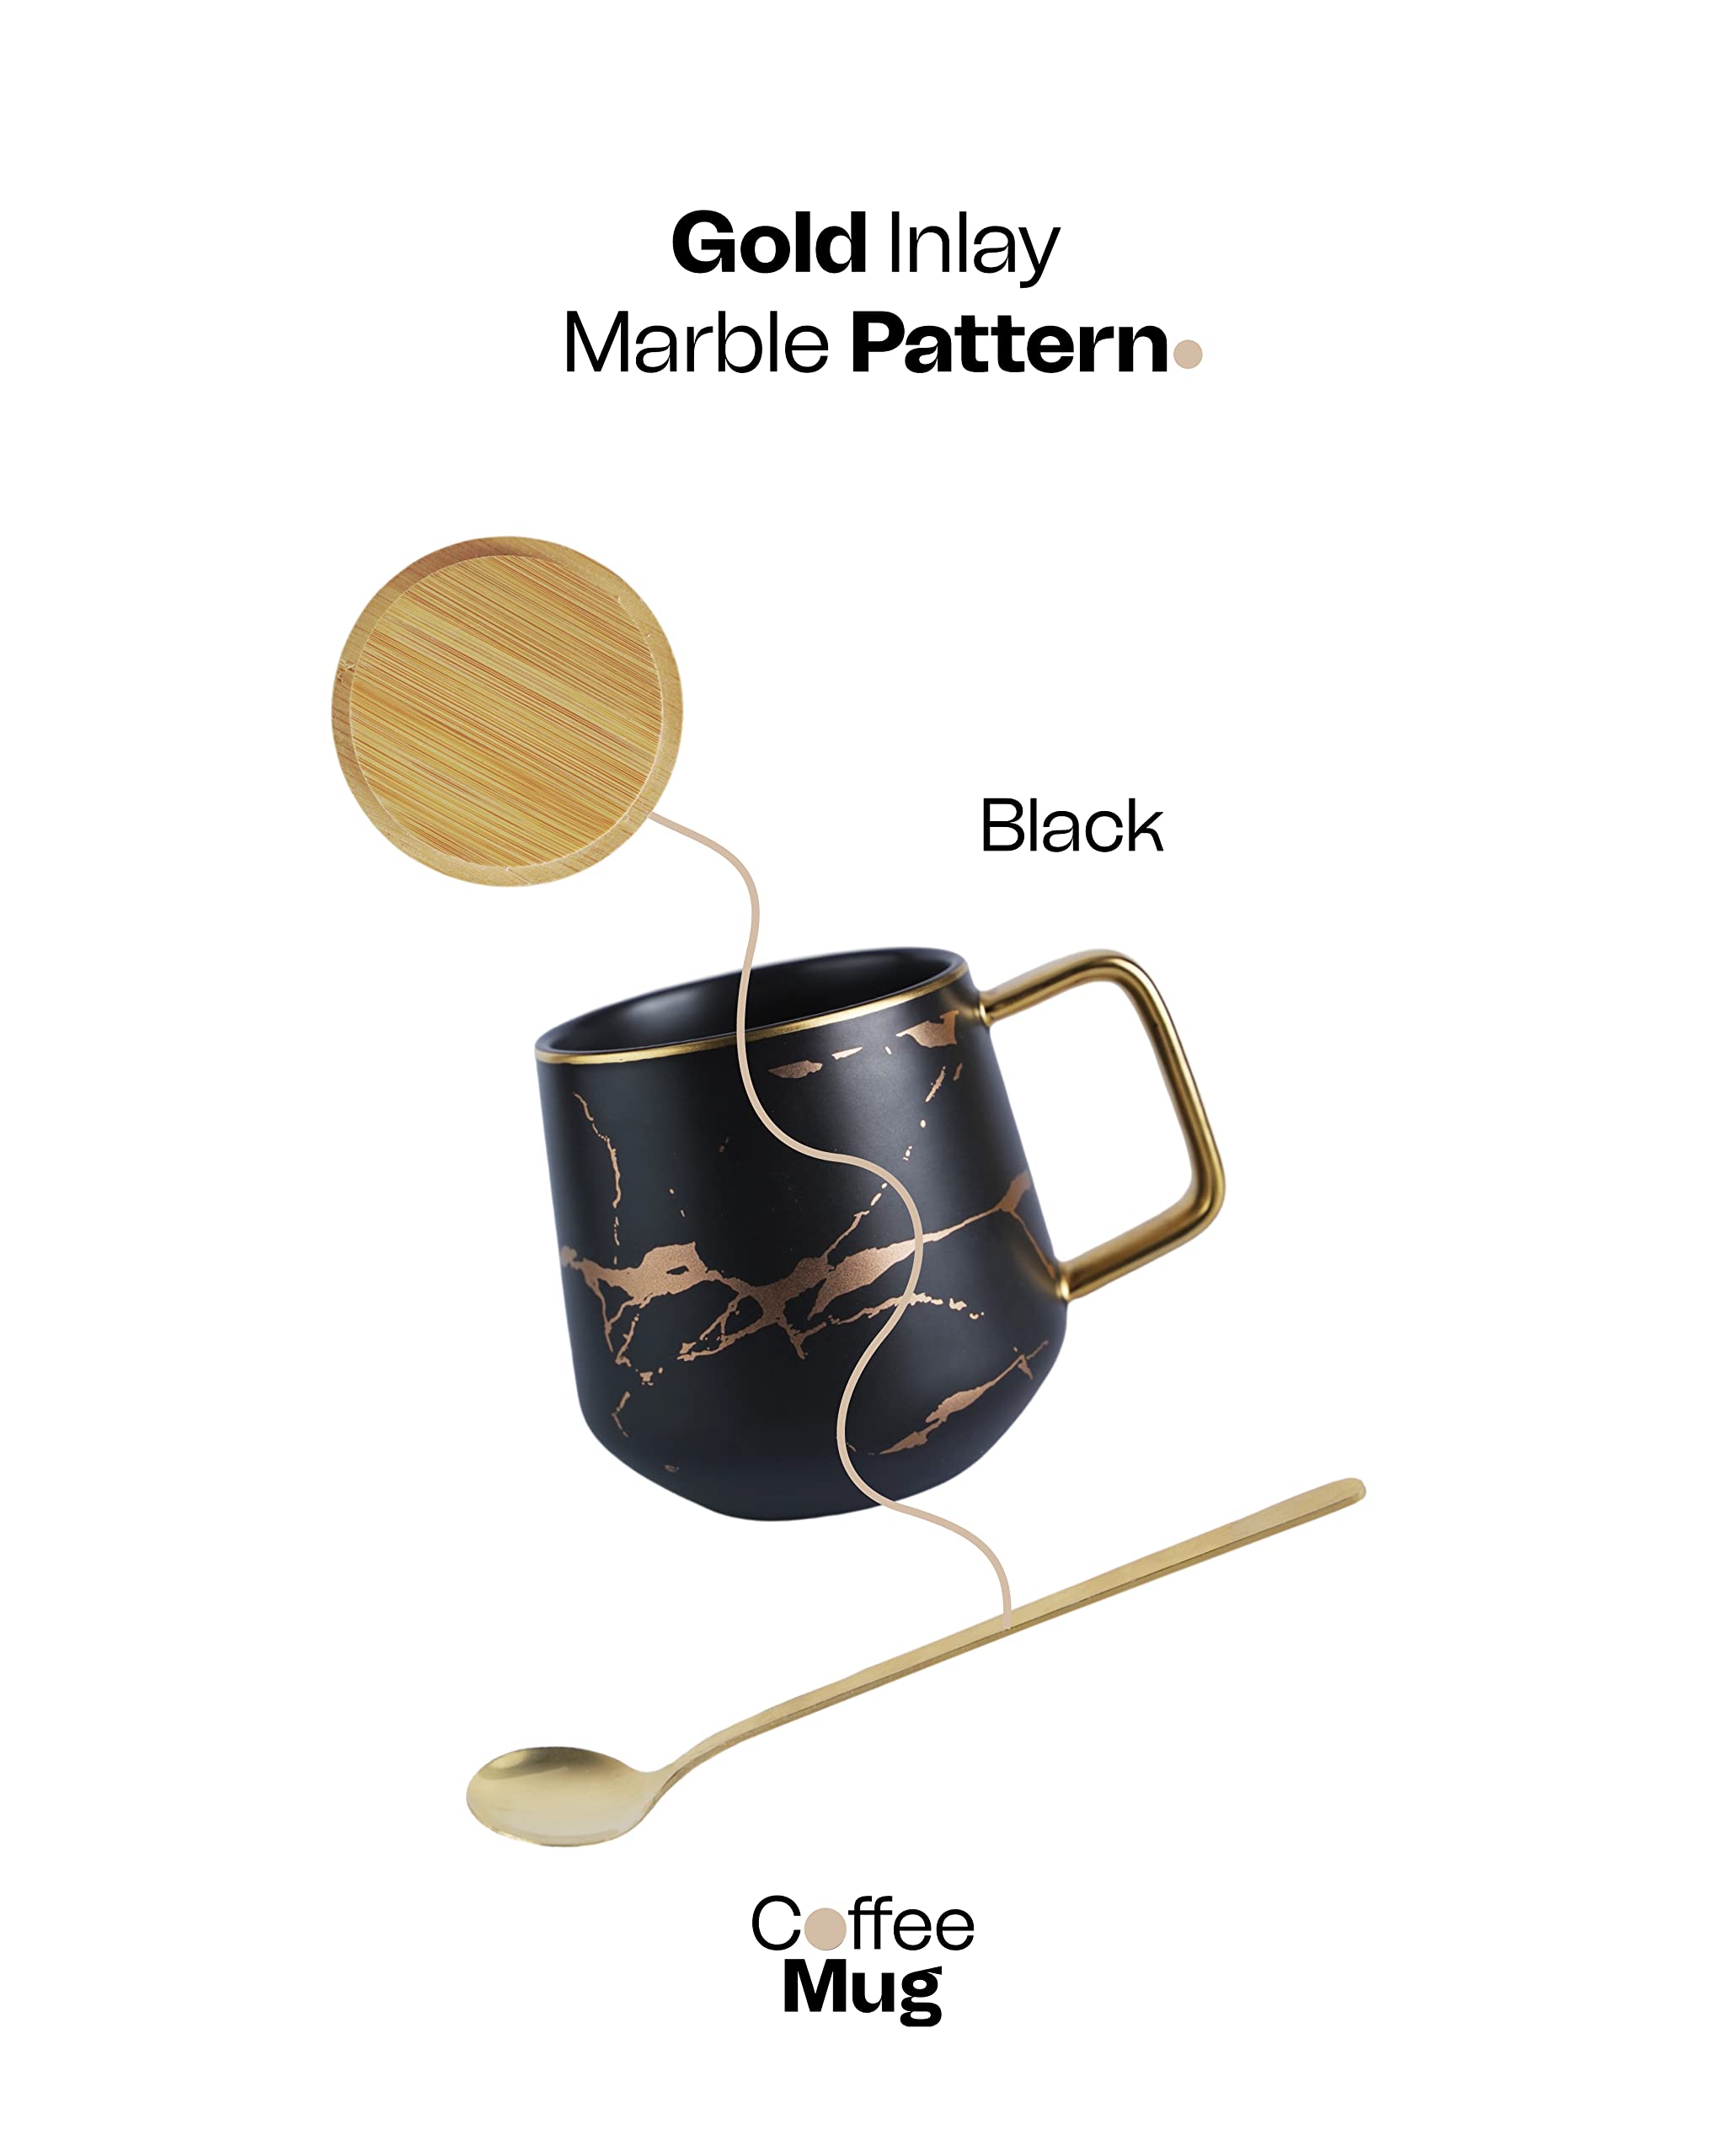 Classic Ceramic Kintsugi Style Black Coffee Tea Mug with Gold Inlay, Spoon and Bamboo Lid- 12 OZ, Large Mugs for Men and Women, Unique Design, Perfect Novelty Gift- Dishwasher Safe